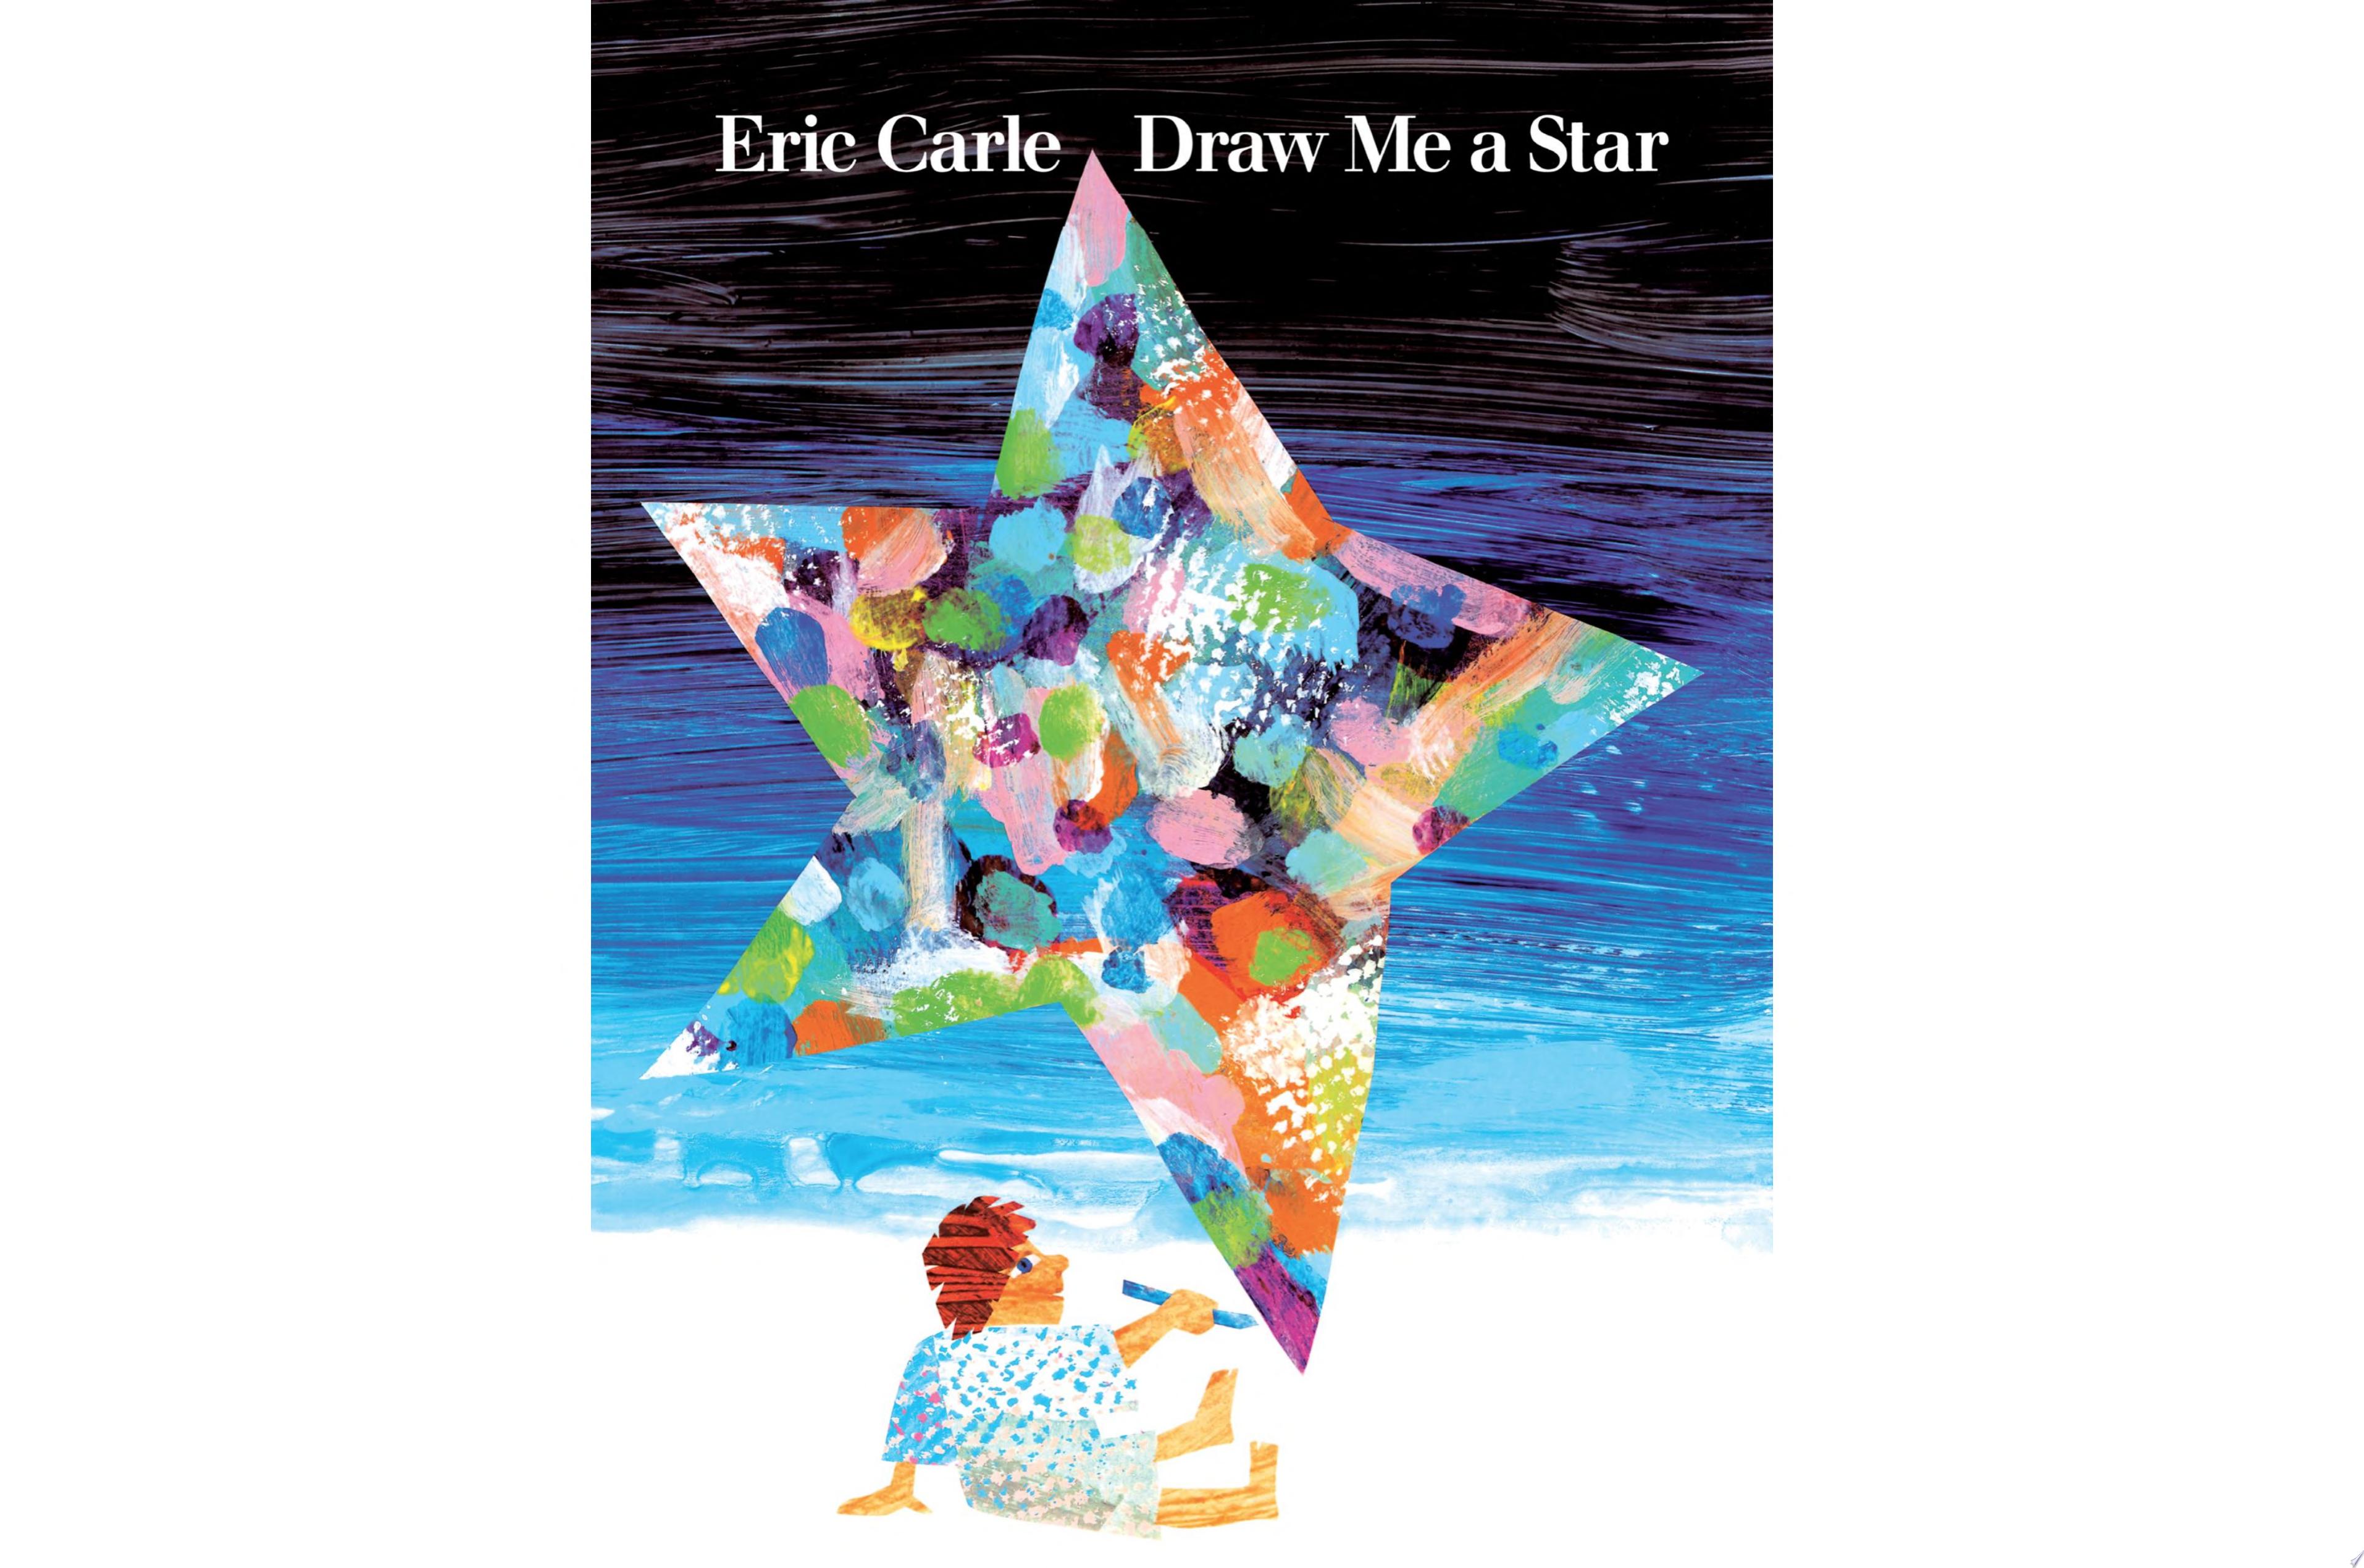 Image for "Draw Me a Star"